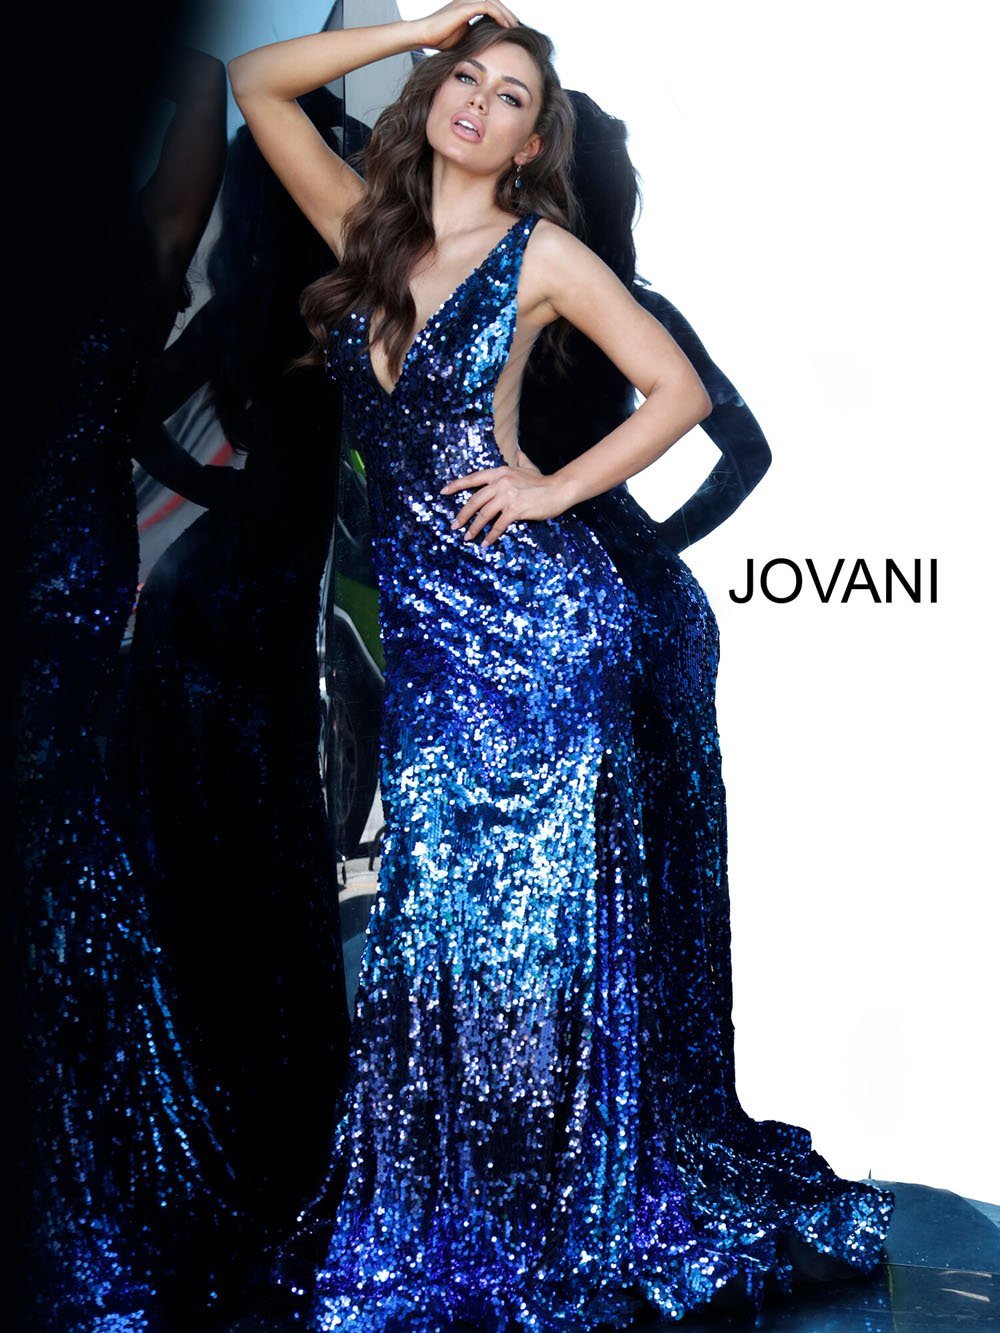 Jovani 3192 dress images in these colors: Blue Multi.